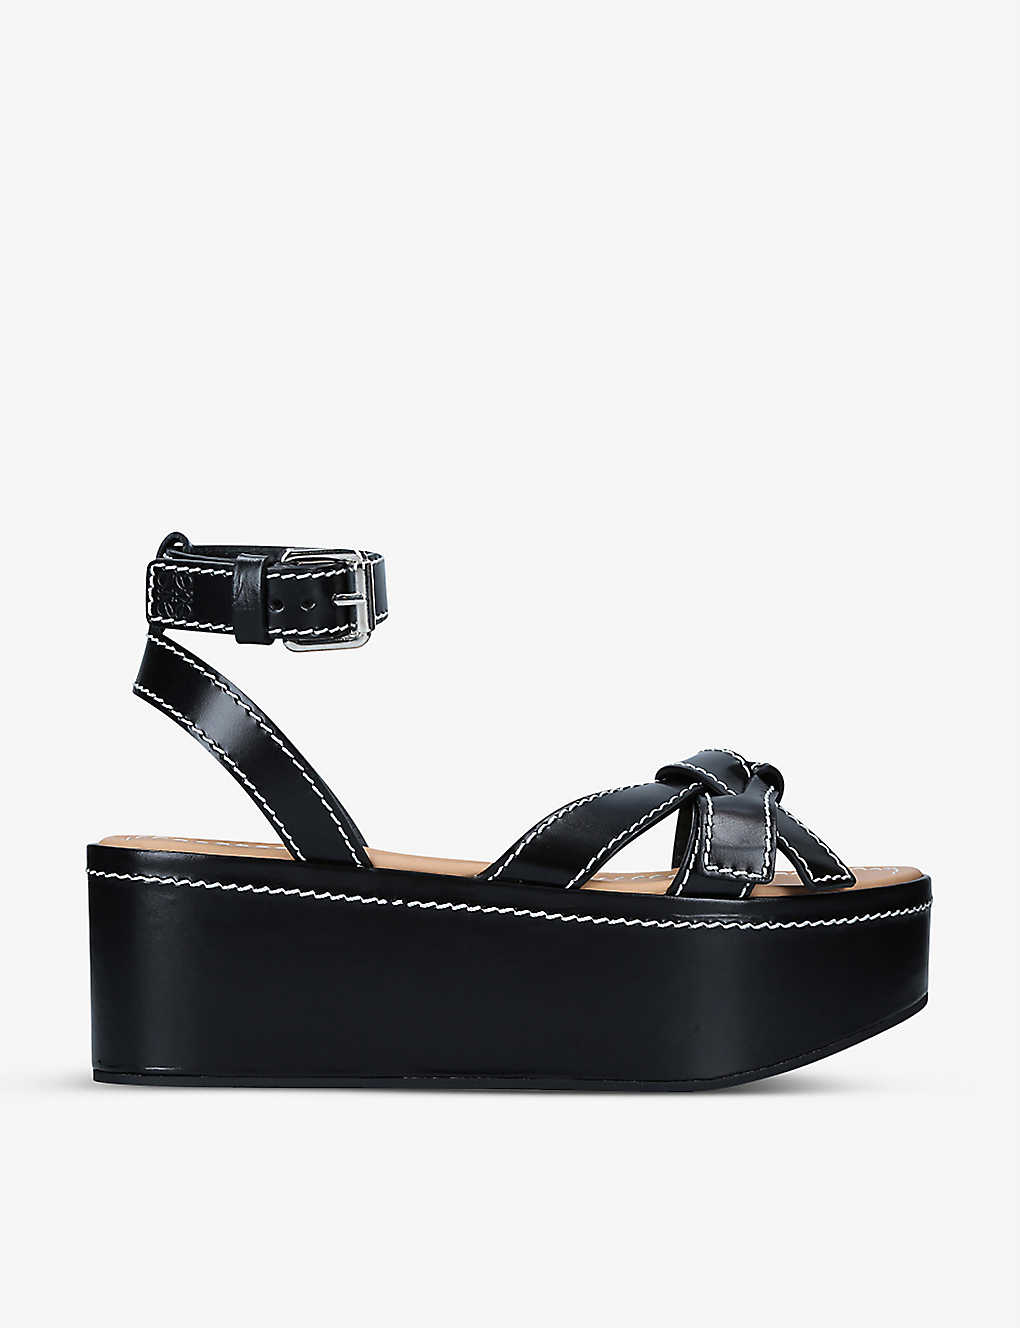 Gate knot-strap leather wedge sandals(9249351)